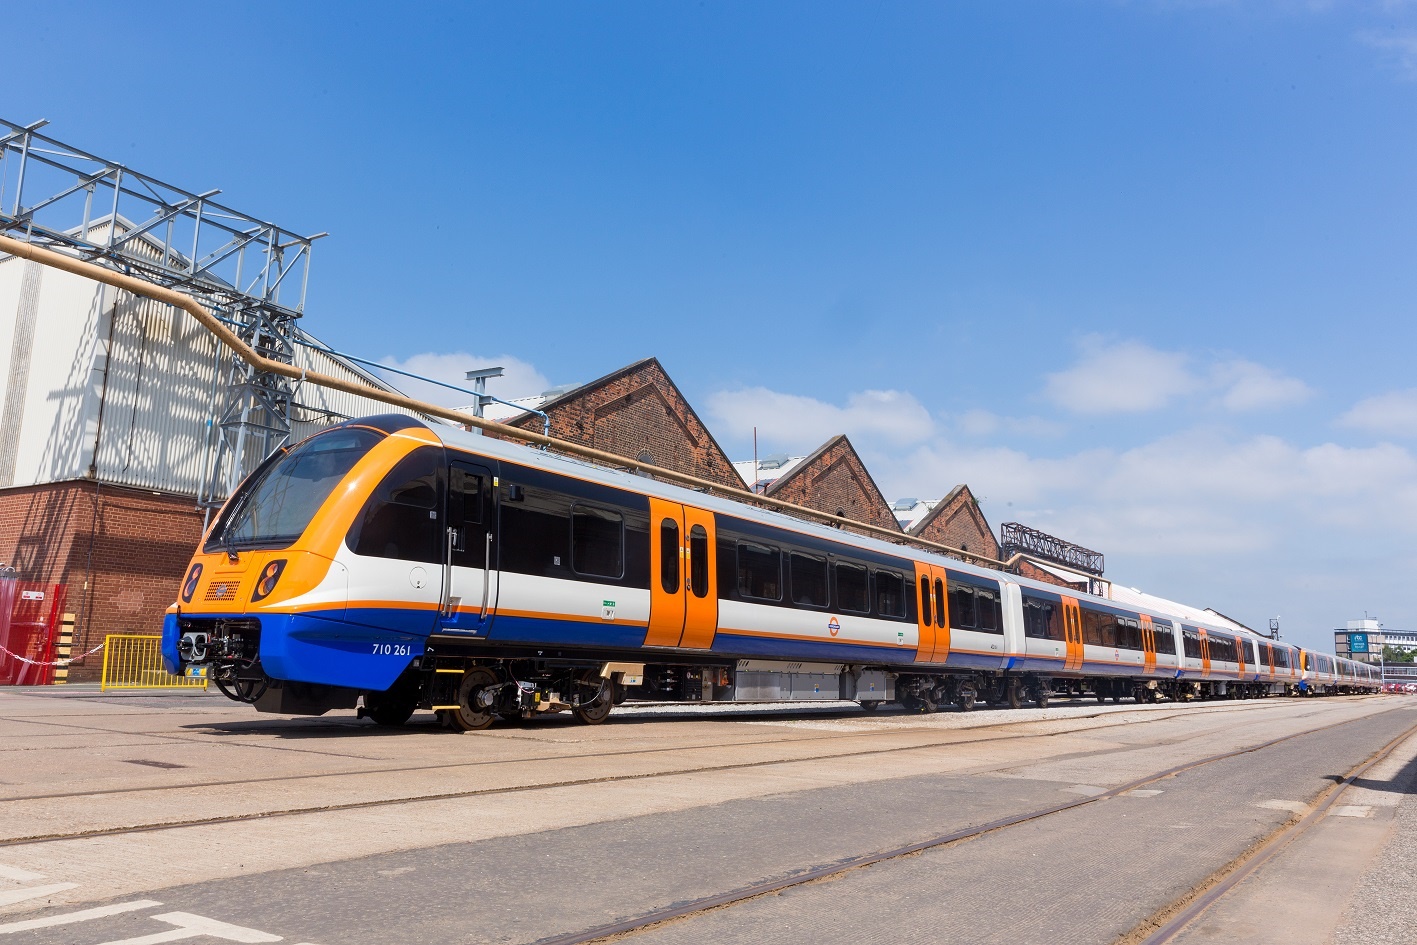 Heavy delays to new trains forces TfL to bring in temporary replacements on London Overground